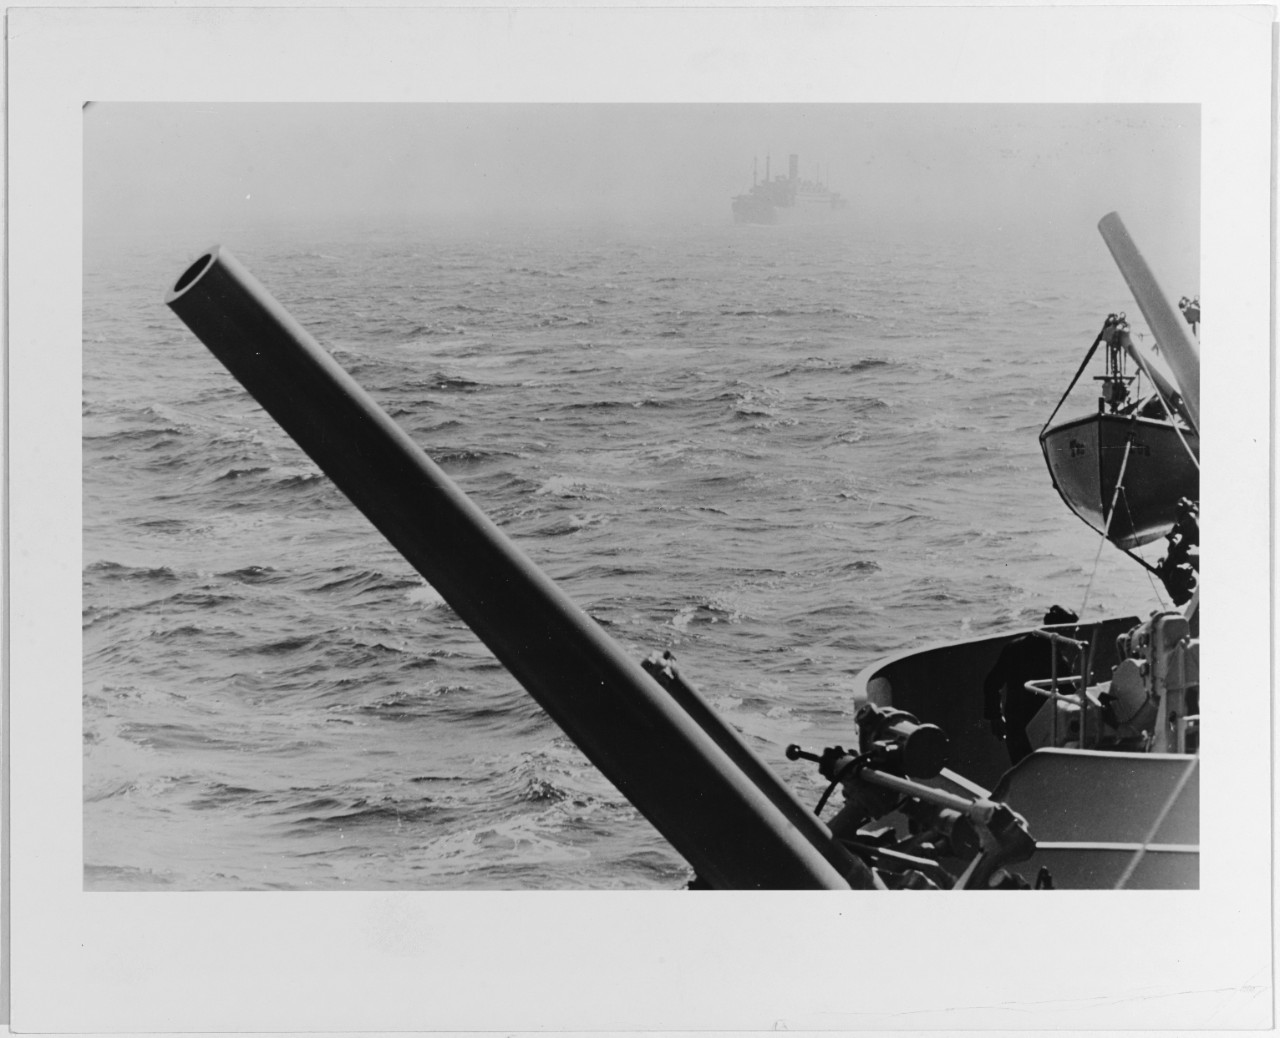 Photo #: NH 49940  Convoy to Iceland, September 1941